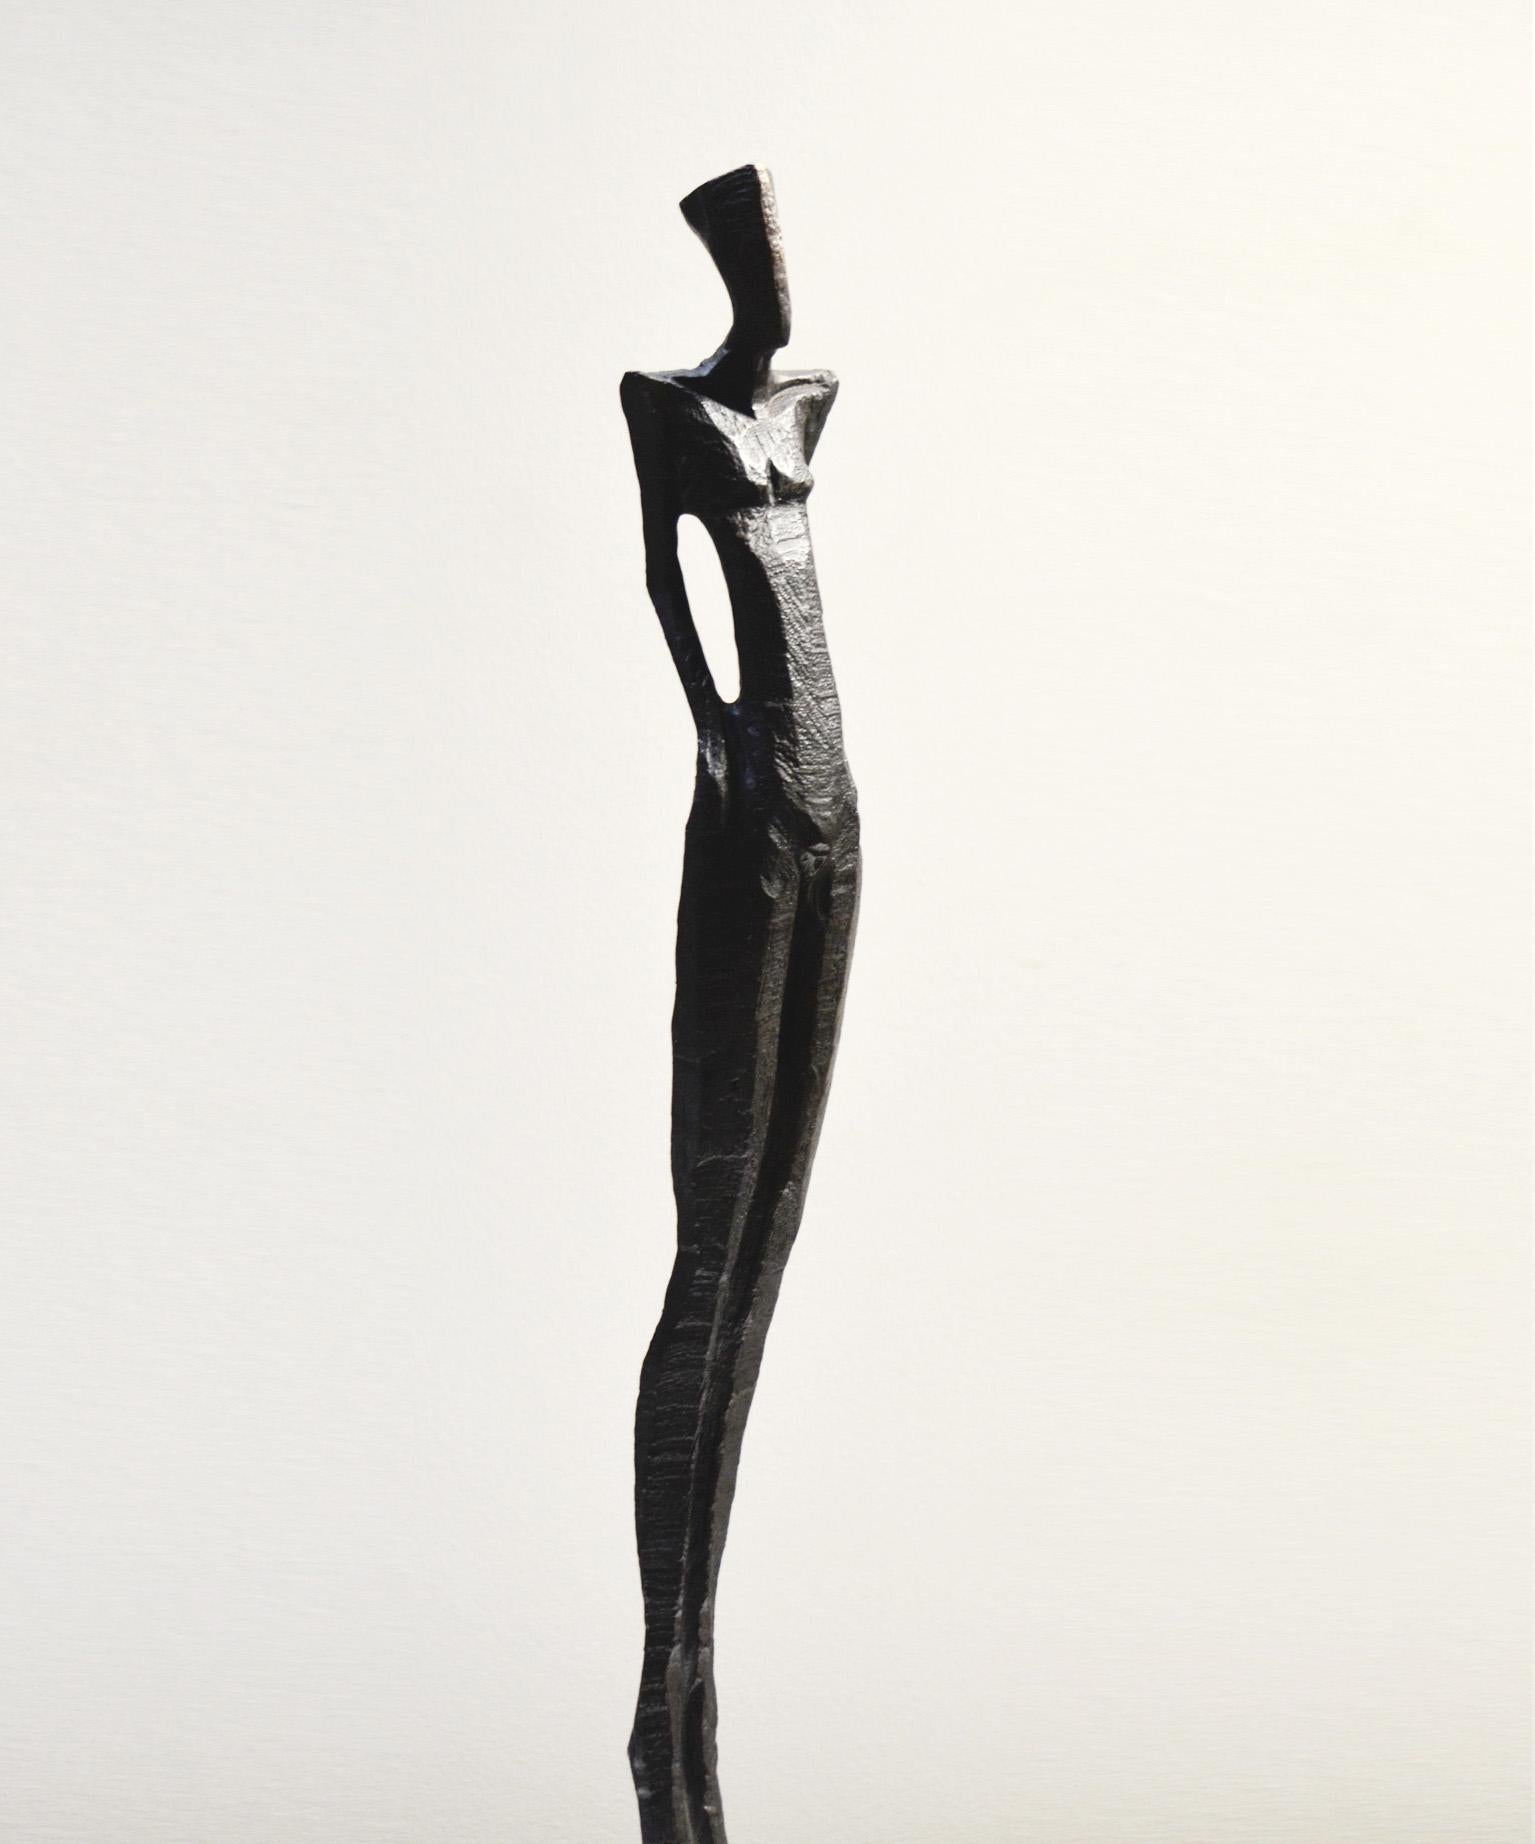 Antonio III is a tall, elegant bronze sculpture of a human figure.  

Nando Kallweit is a German sculptor working in bronze and oak.  Kallweit carves the original piece from a piece of oak using a chainsaw.  The oak marque is then used to create a